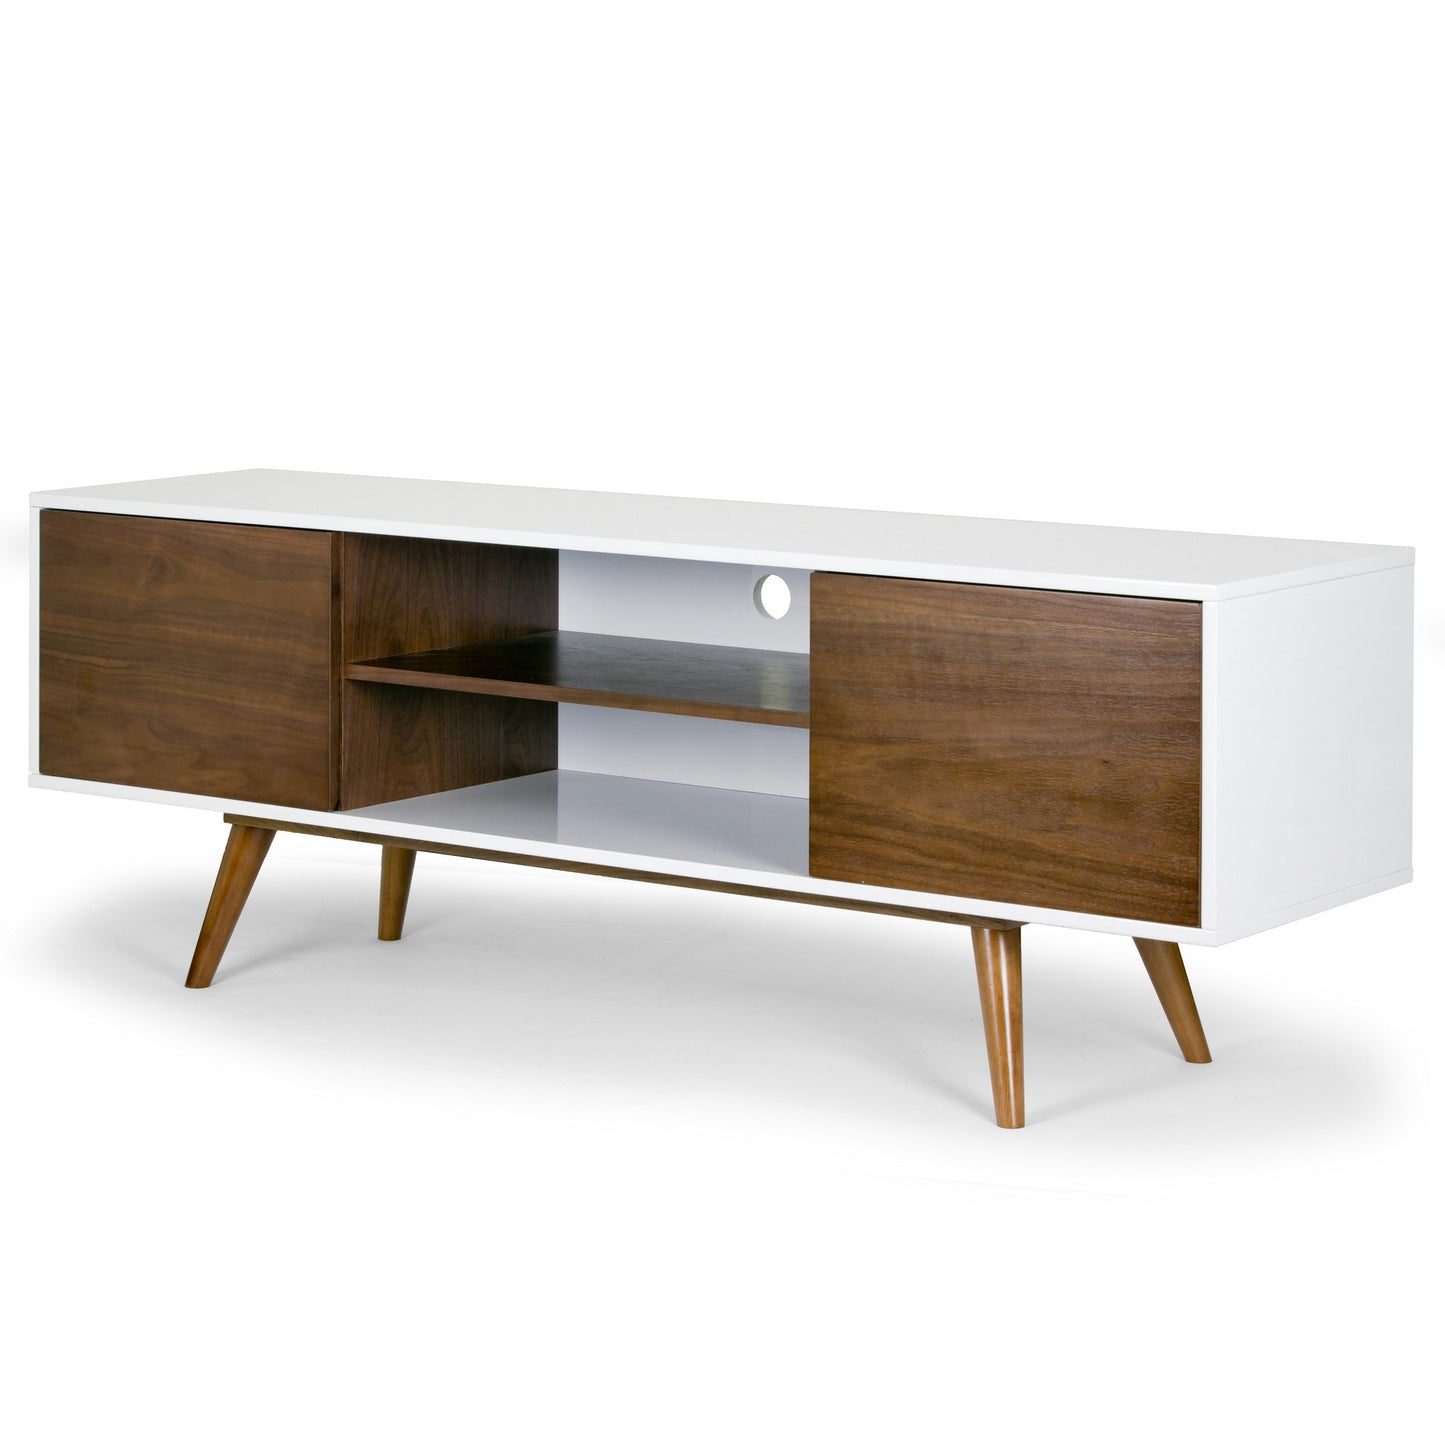 Ailsa Scandinavian Style TV Stand with Walnut and White Finish